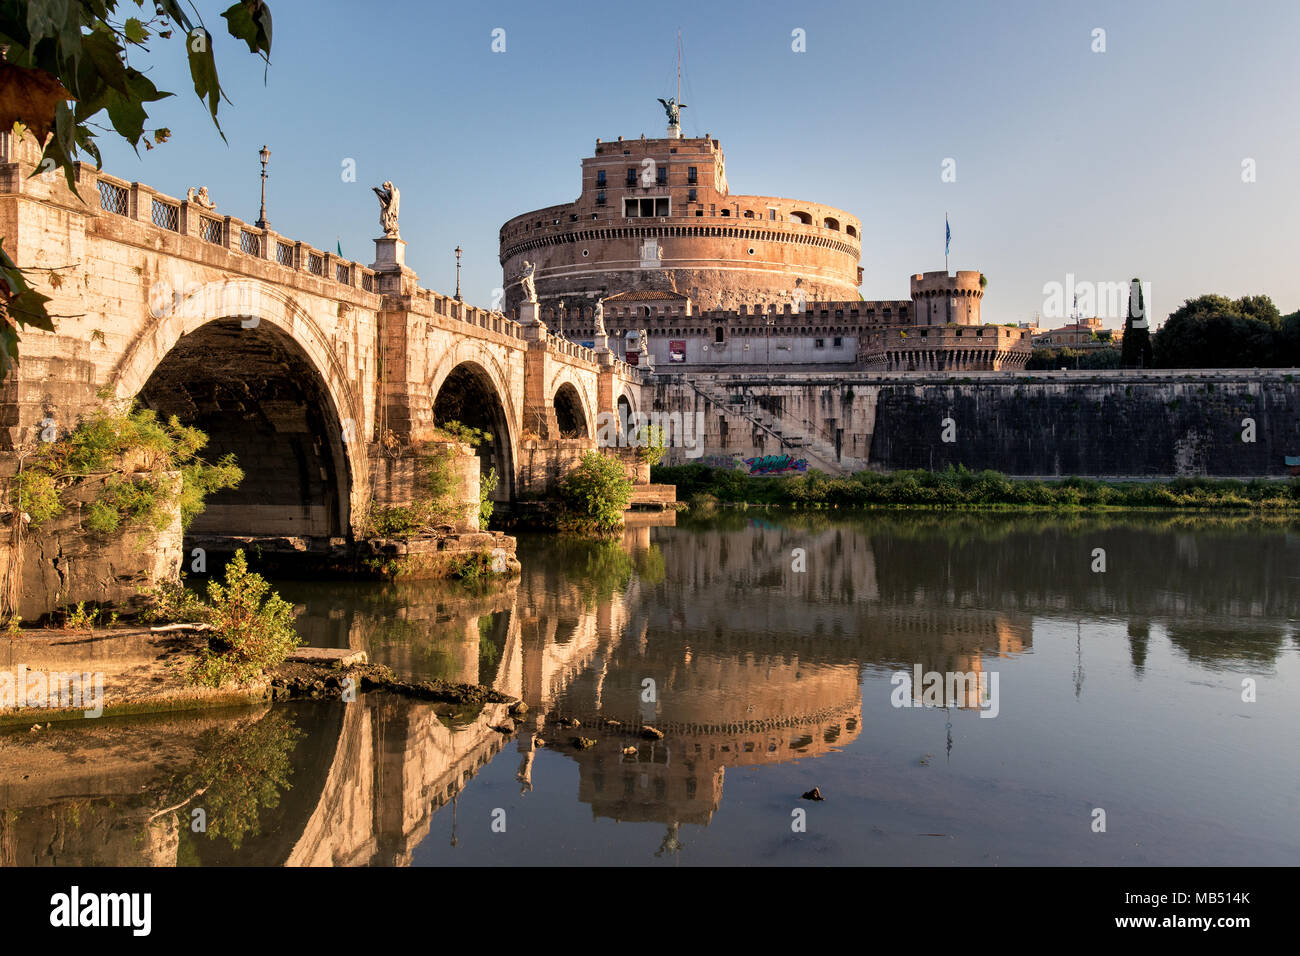 San't Angelo Castle in Rome, Italy Stock Photo